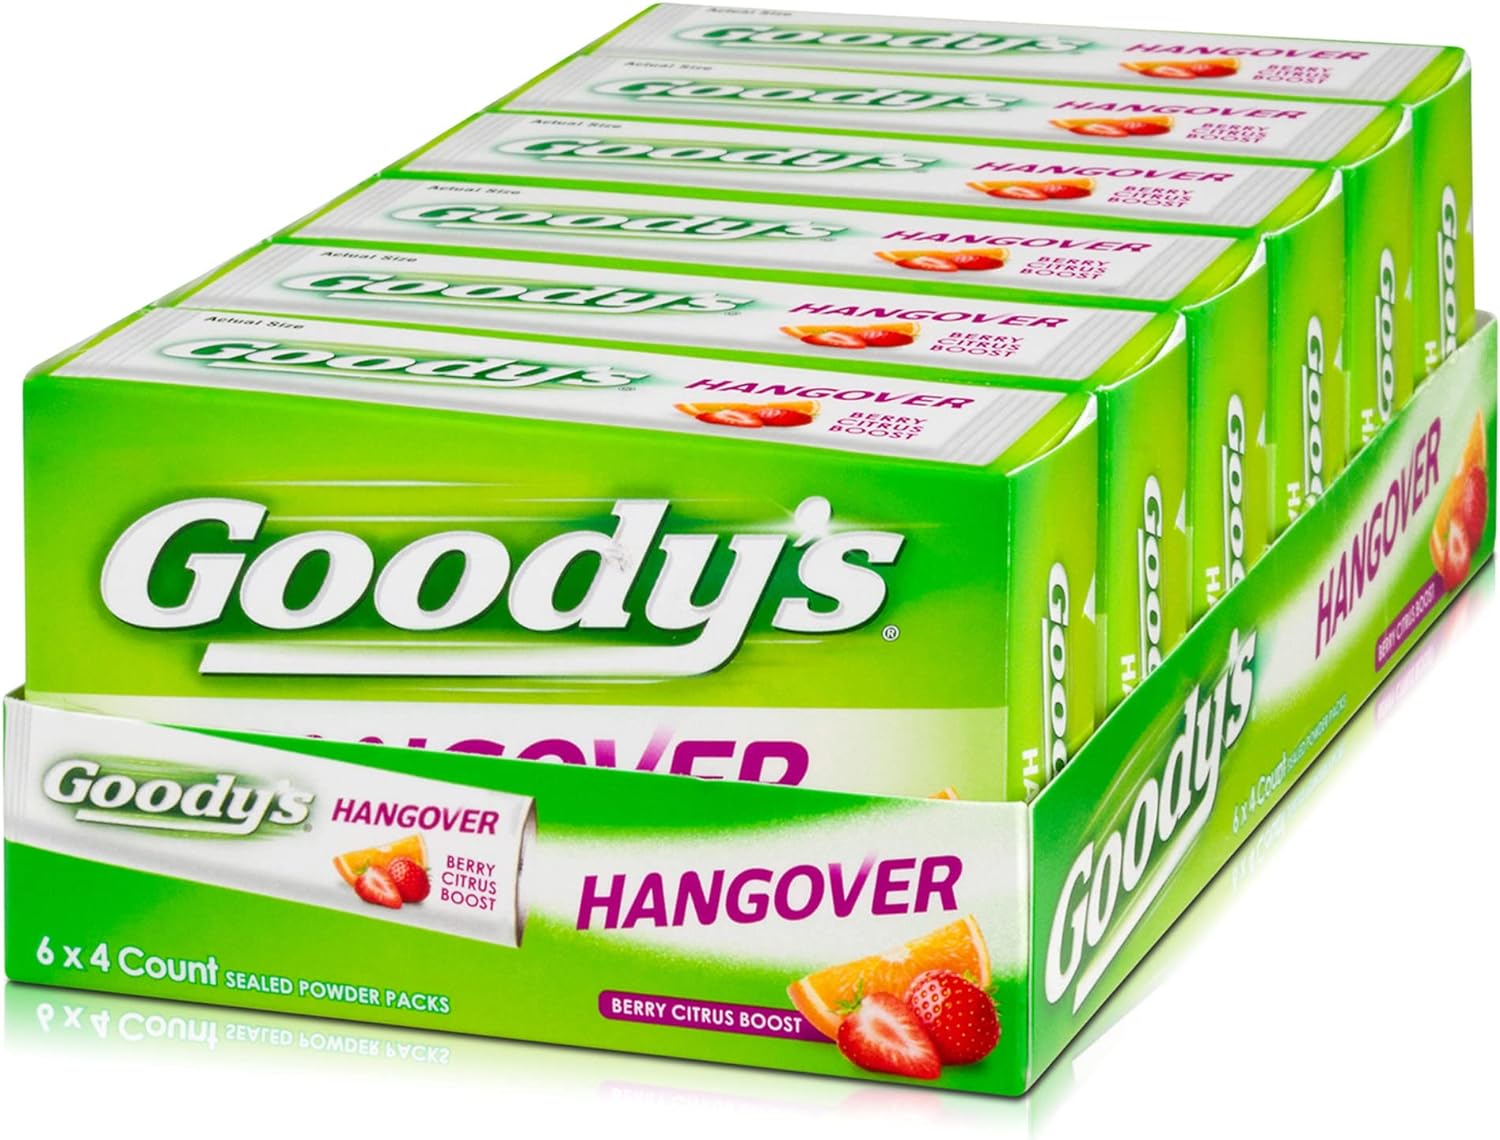 Goody's Hangover Powders, Fast Pain Relief, Berry Citrus Flavor, 4 Stick Powders, 6 Pack